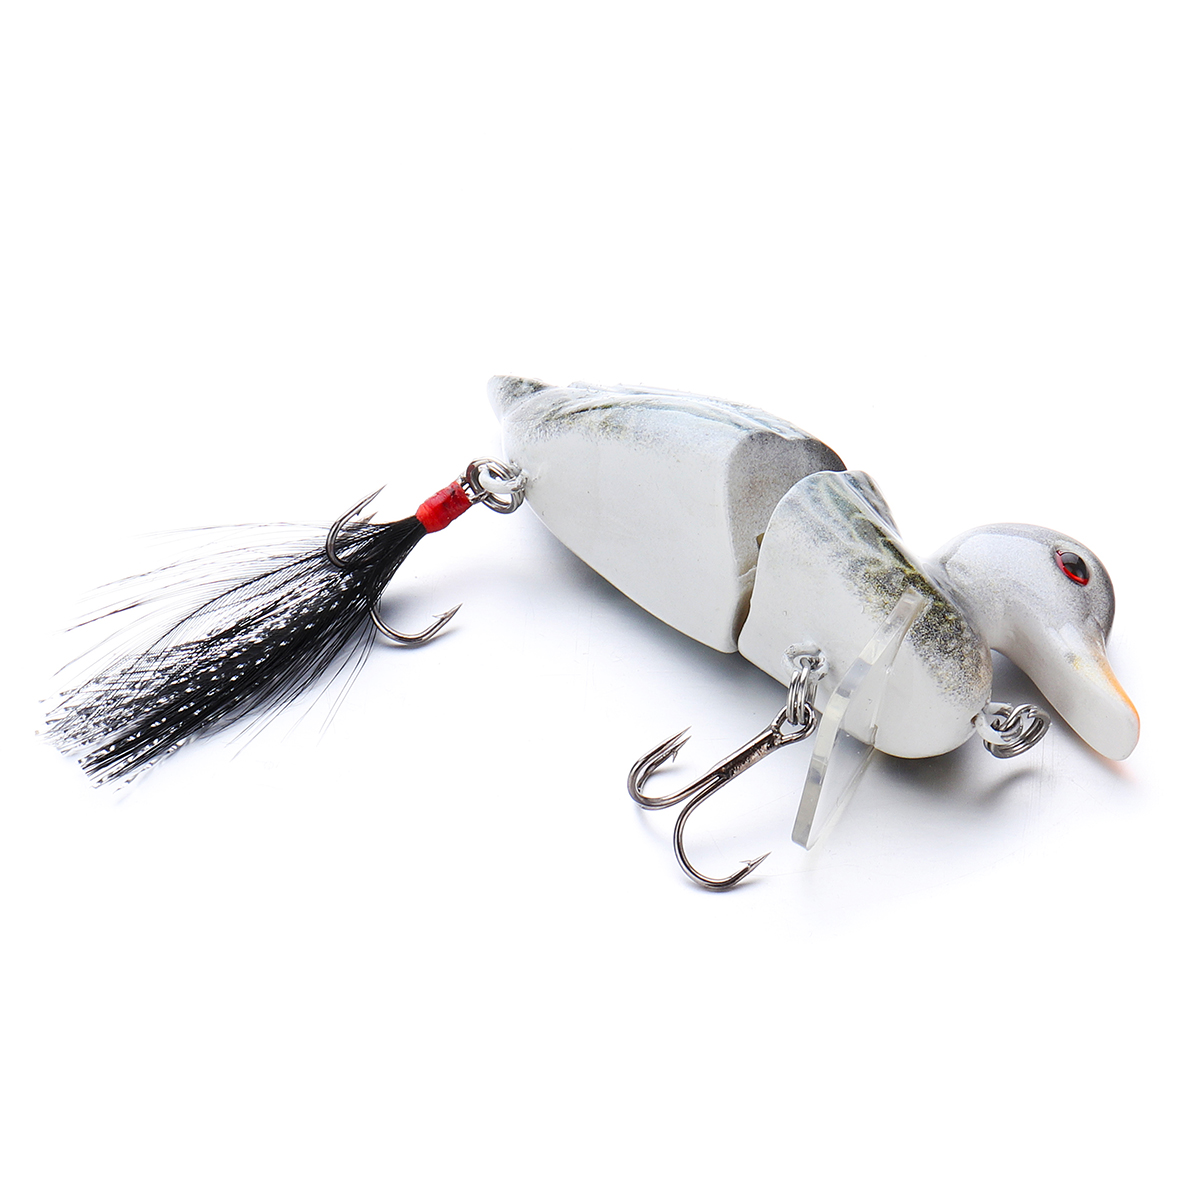 3D-Eyes-Duck-Lure-Artificial-Fishing-Bait-Catching-Topwater-With-Hooks-Fishing-1496193-6